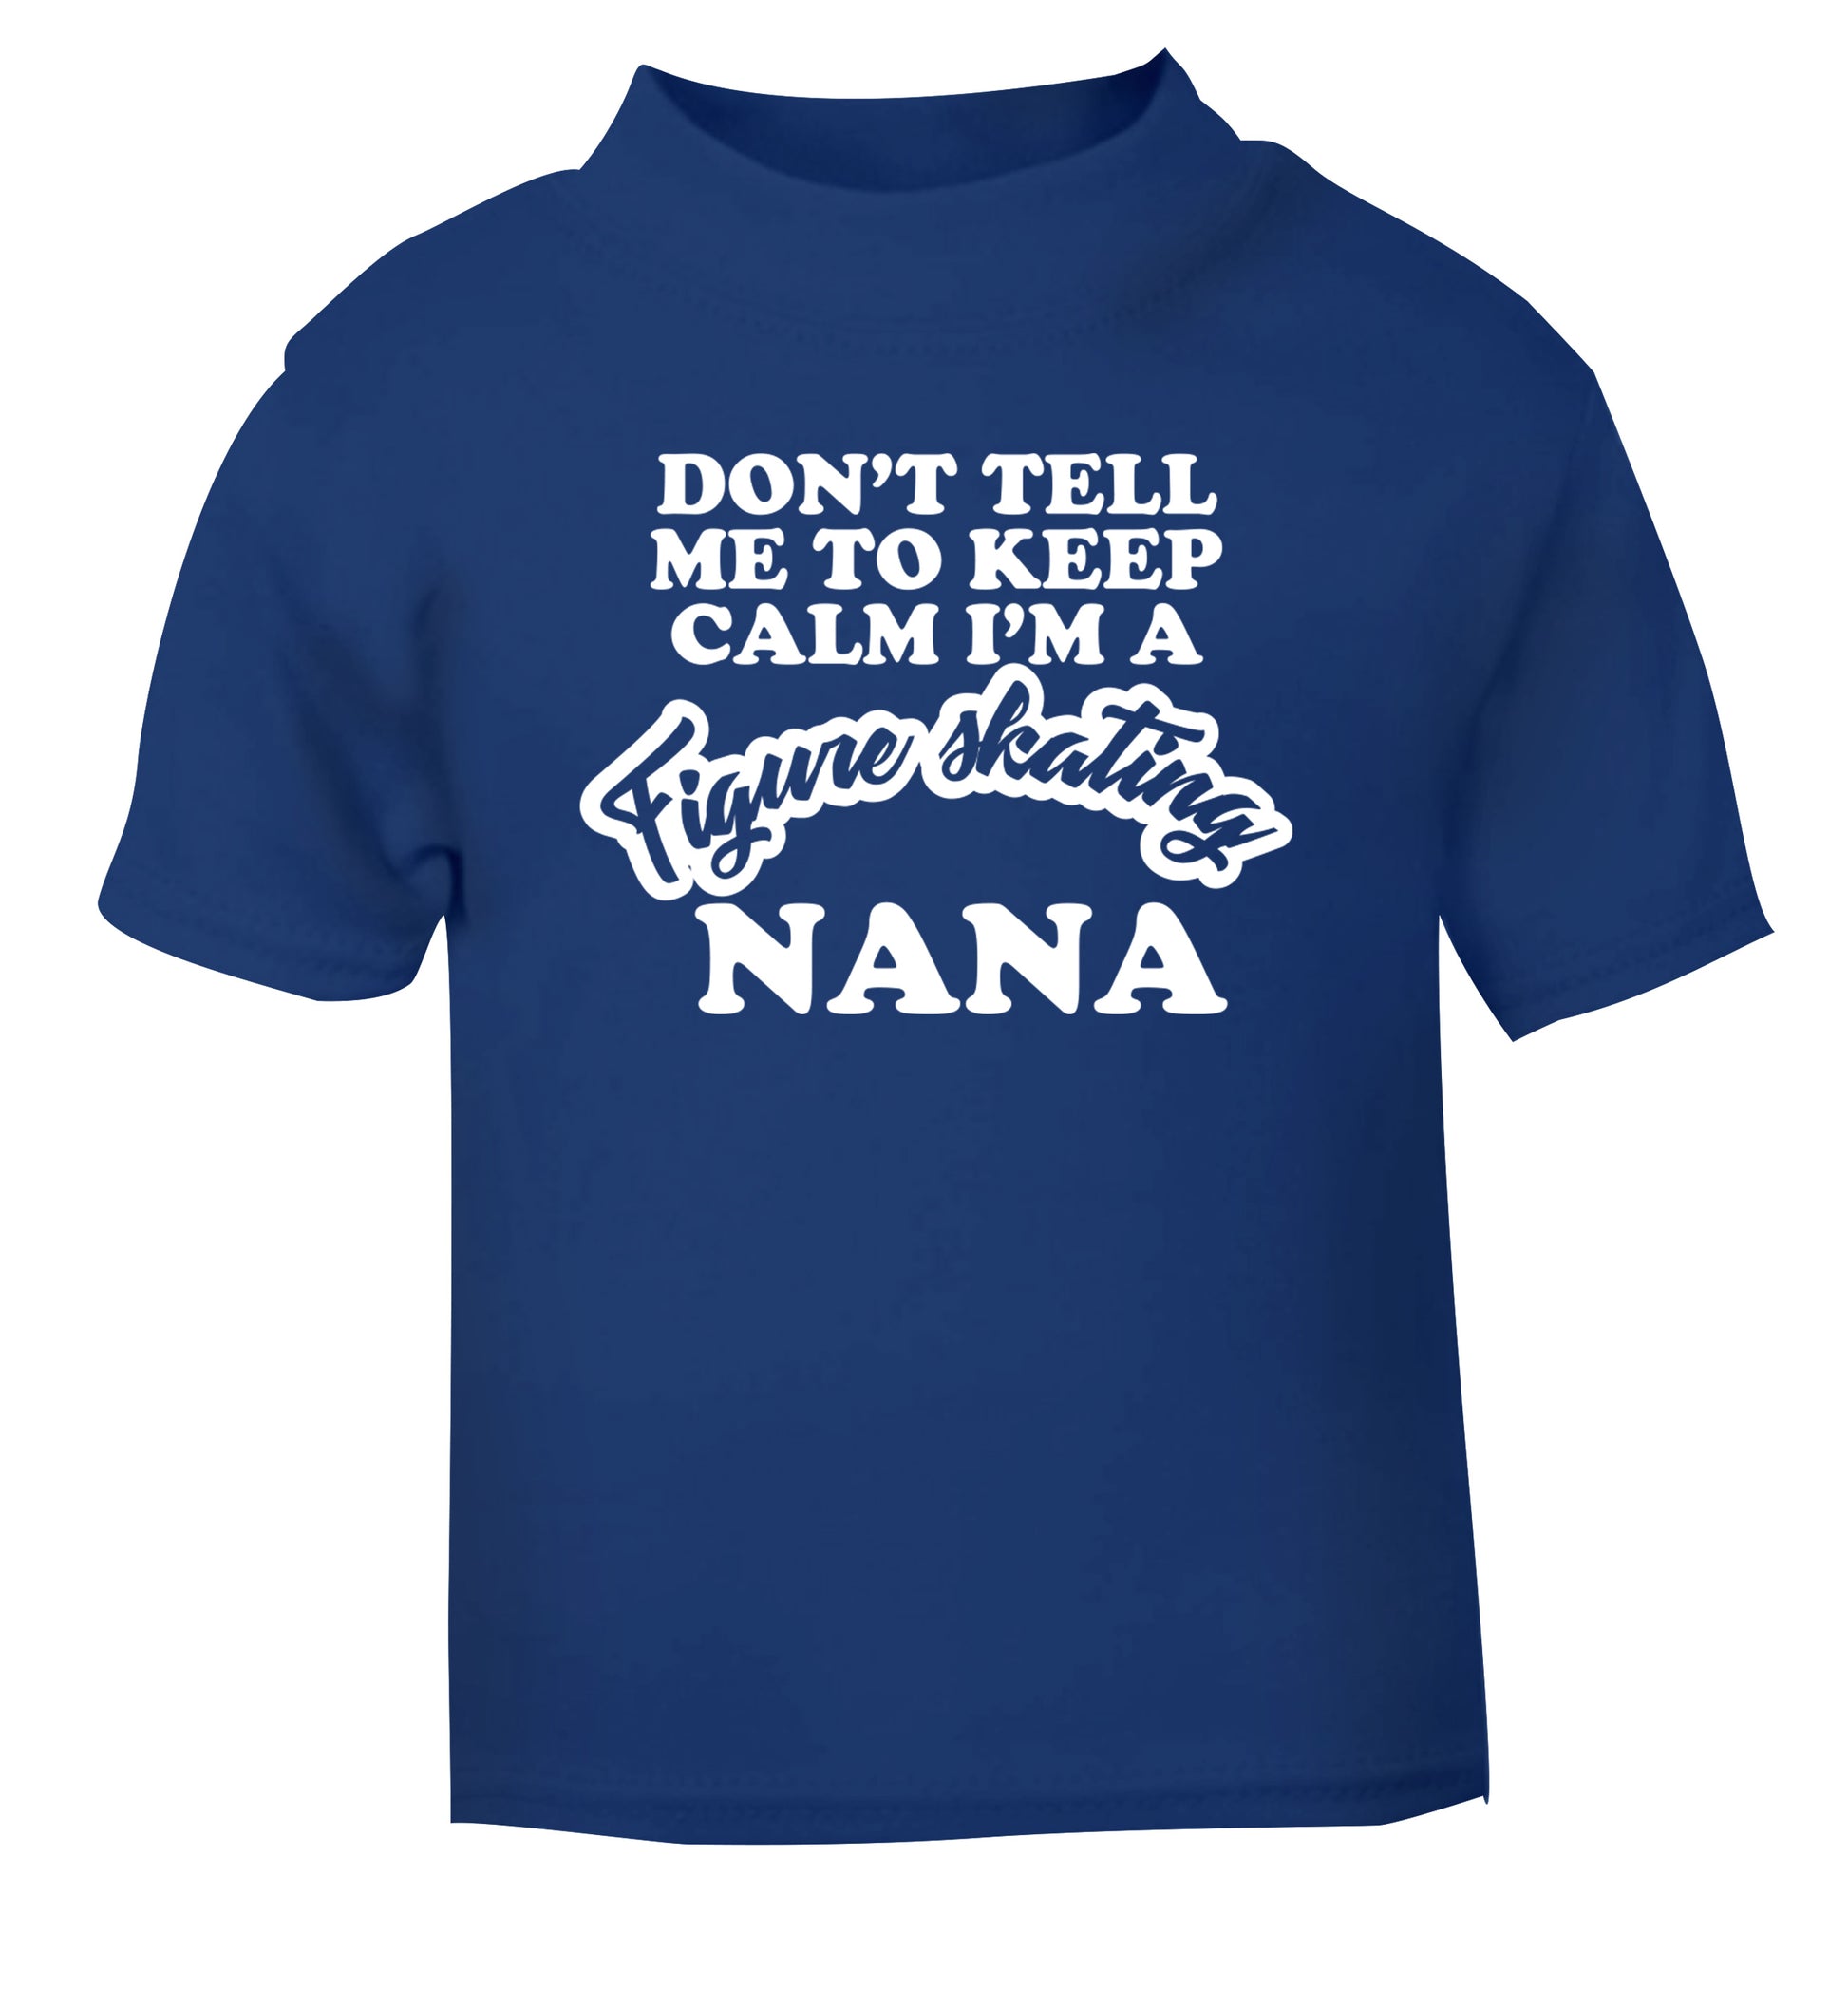 Don't tell me to keep calm I'm a figure skating nana blue Baby Toddler Tshirt 2 Years